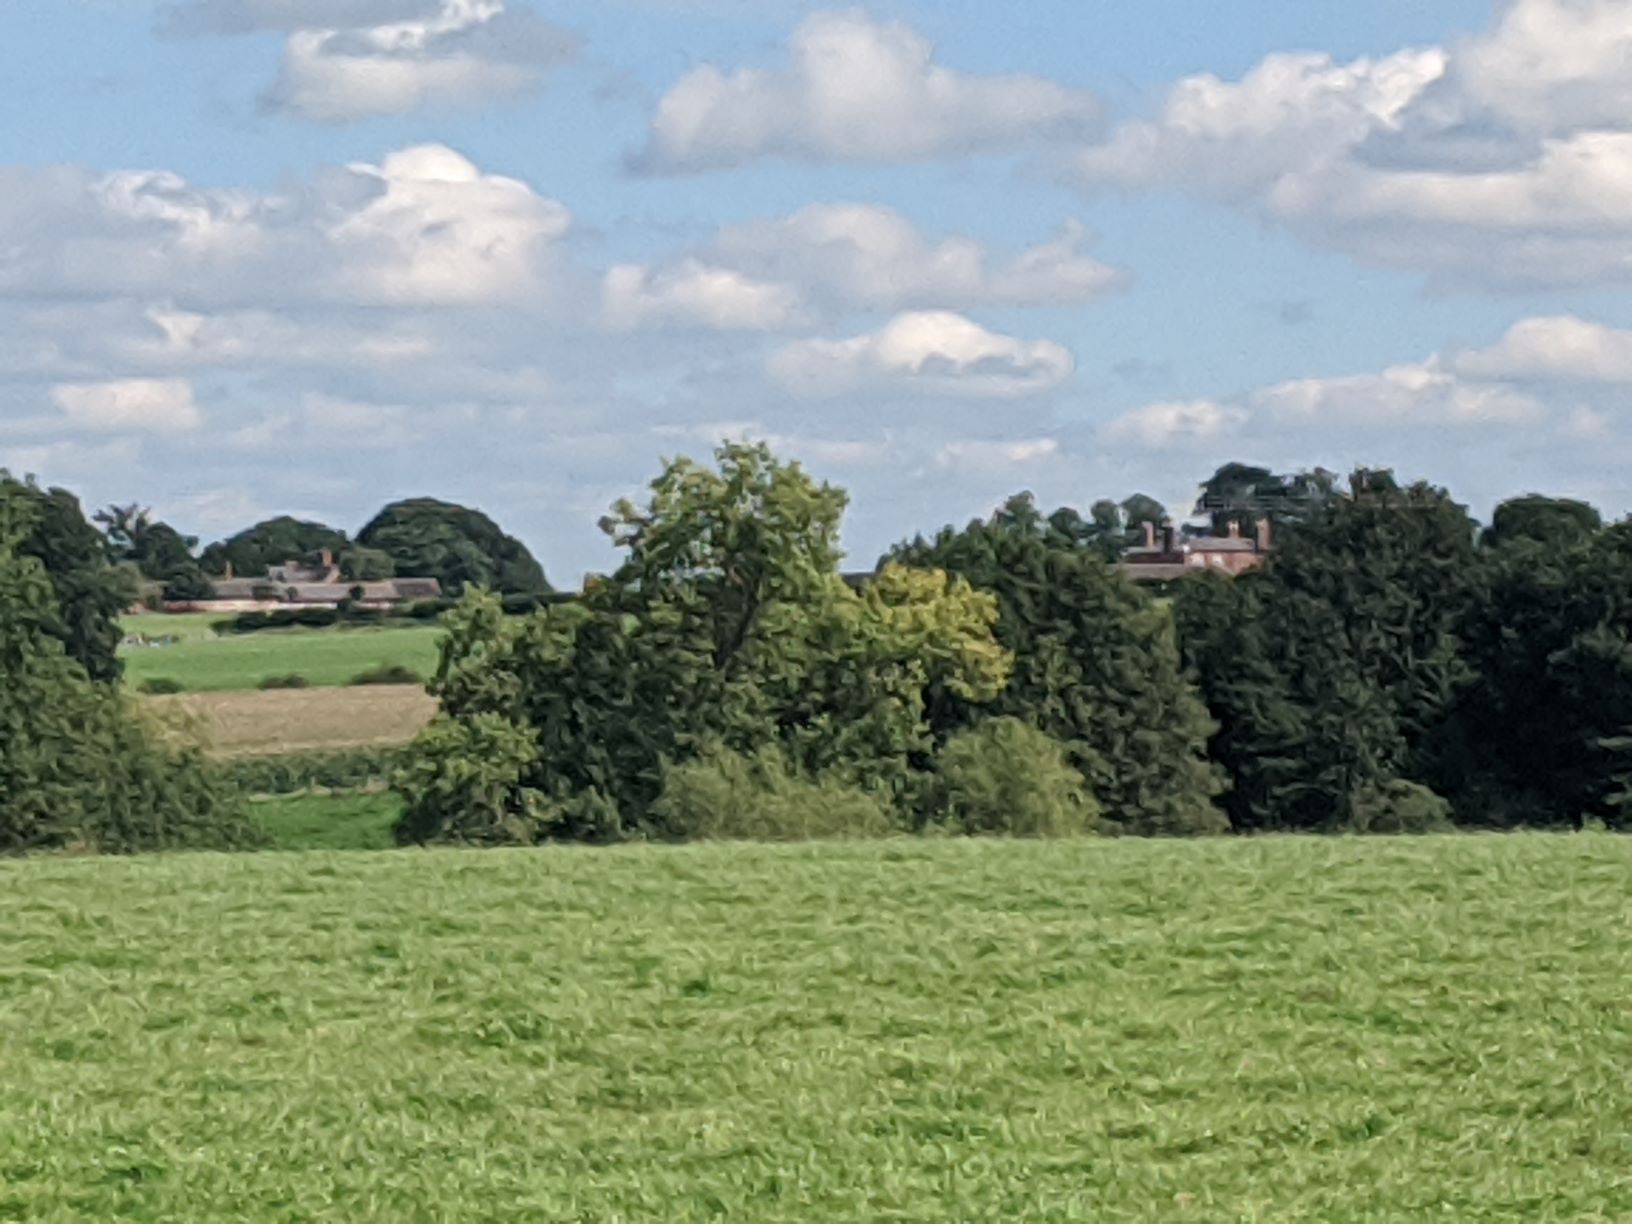 Ball farm and Hankelow Manor from Monks Hall farm, August 24th